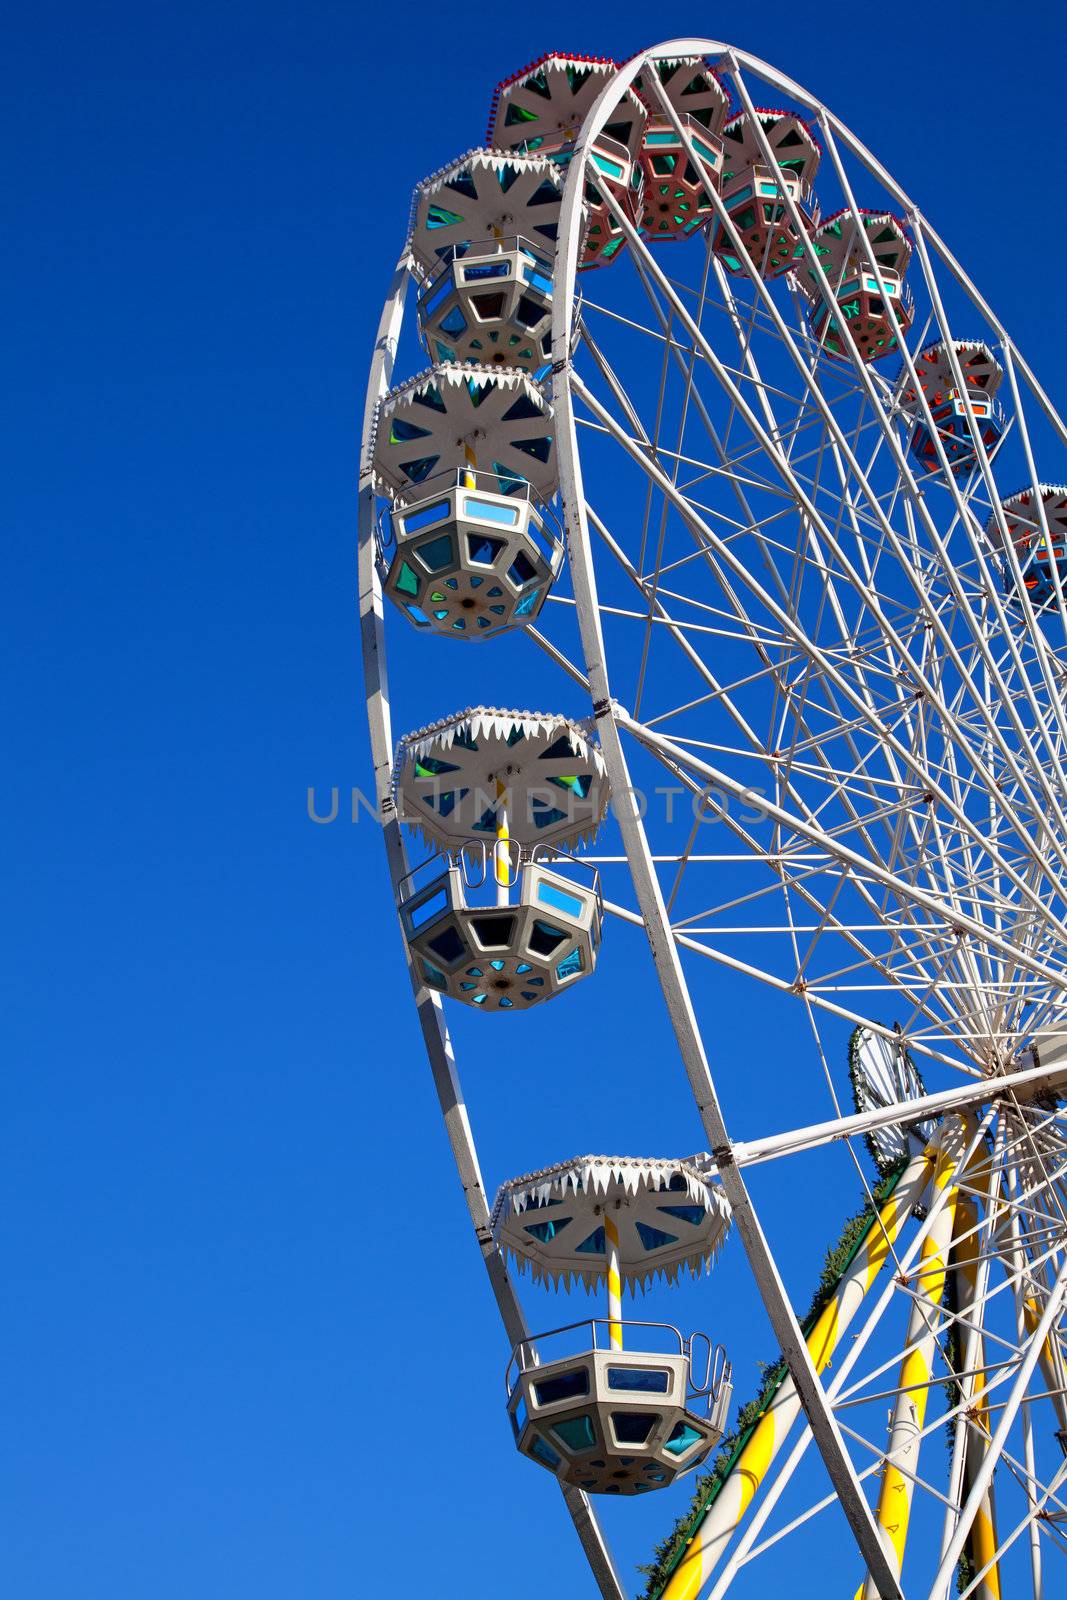 Attraction is the wheel of review on background blue sky by motorolka